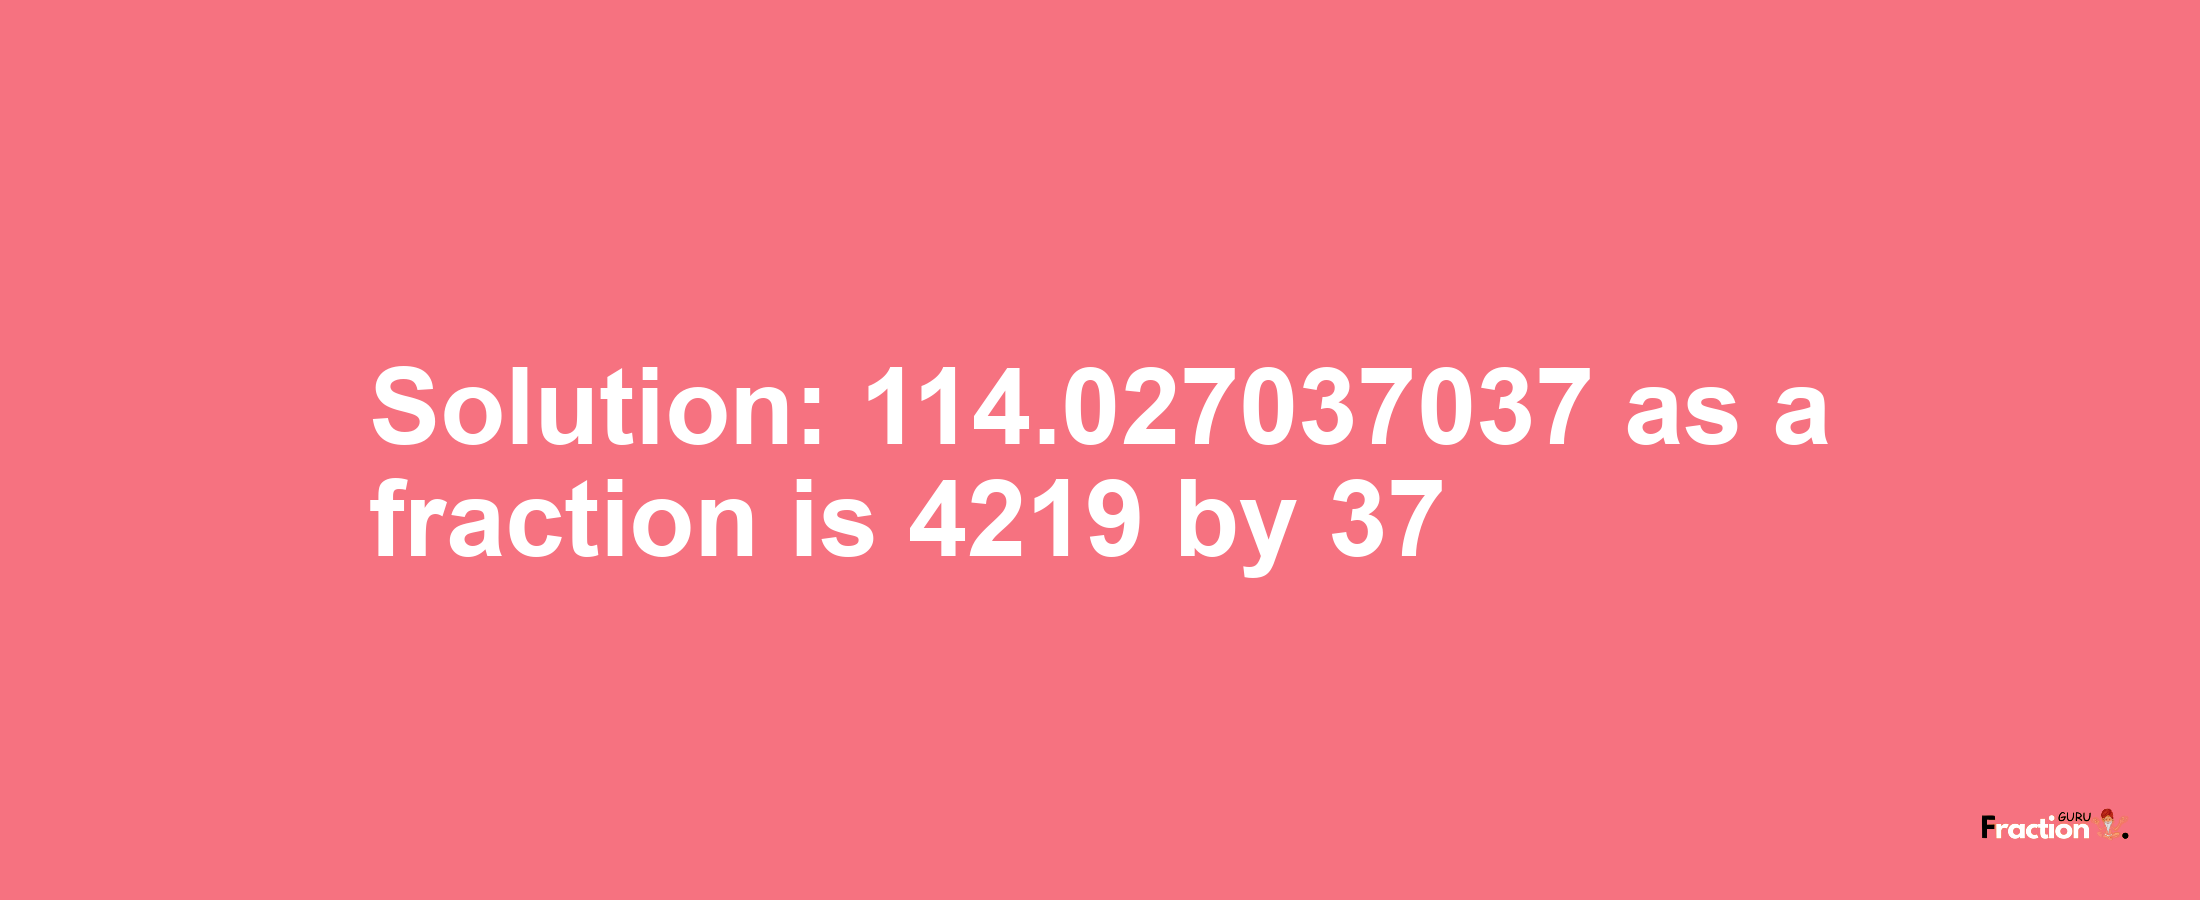 Solution:114.027037037 as a fraction is 4219/37